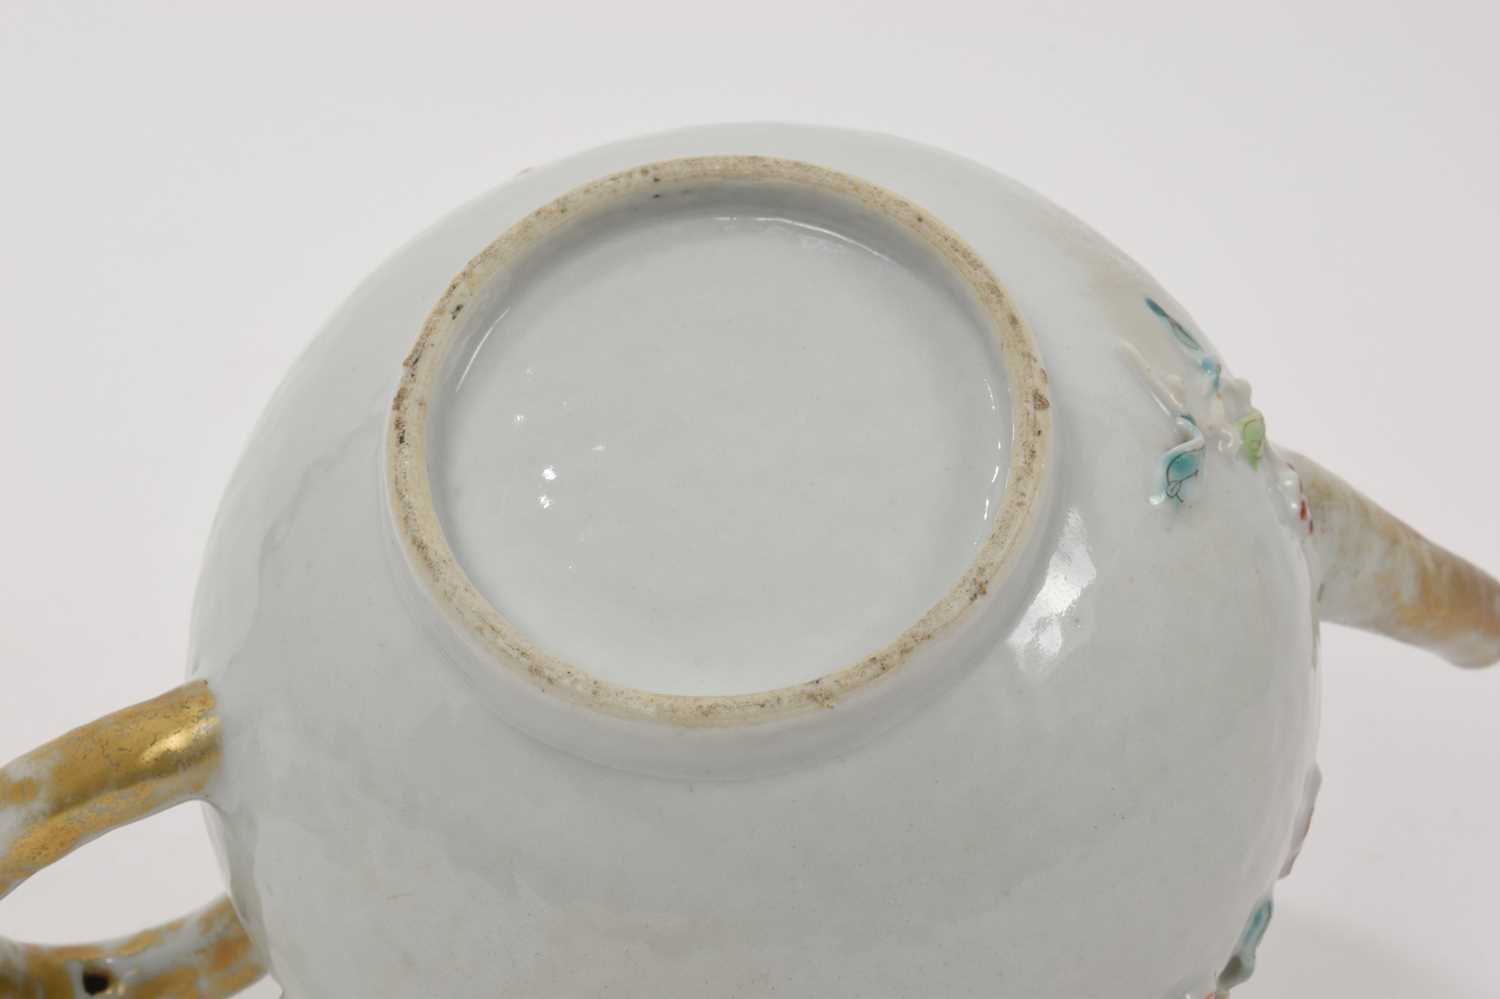 18th century Chinese export porcelain teapot and cover - Image 7 of 8